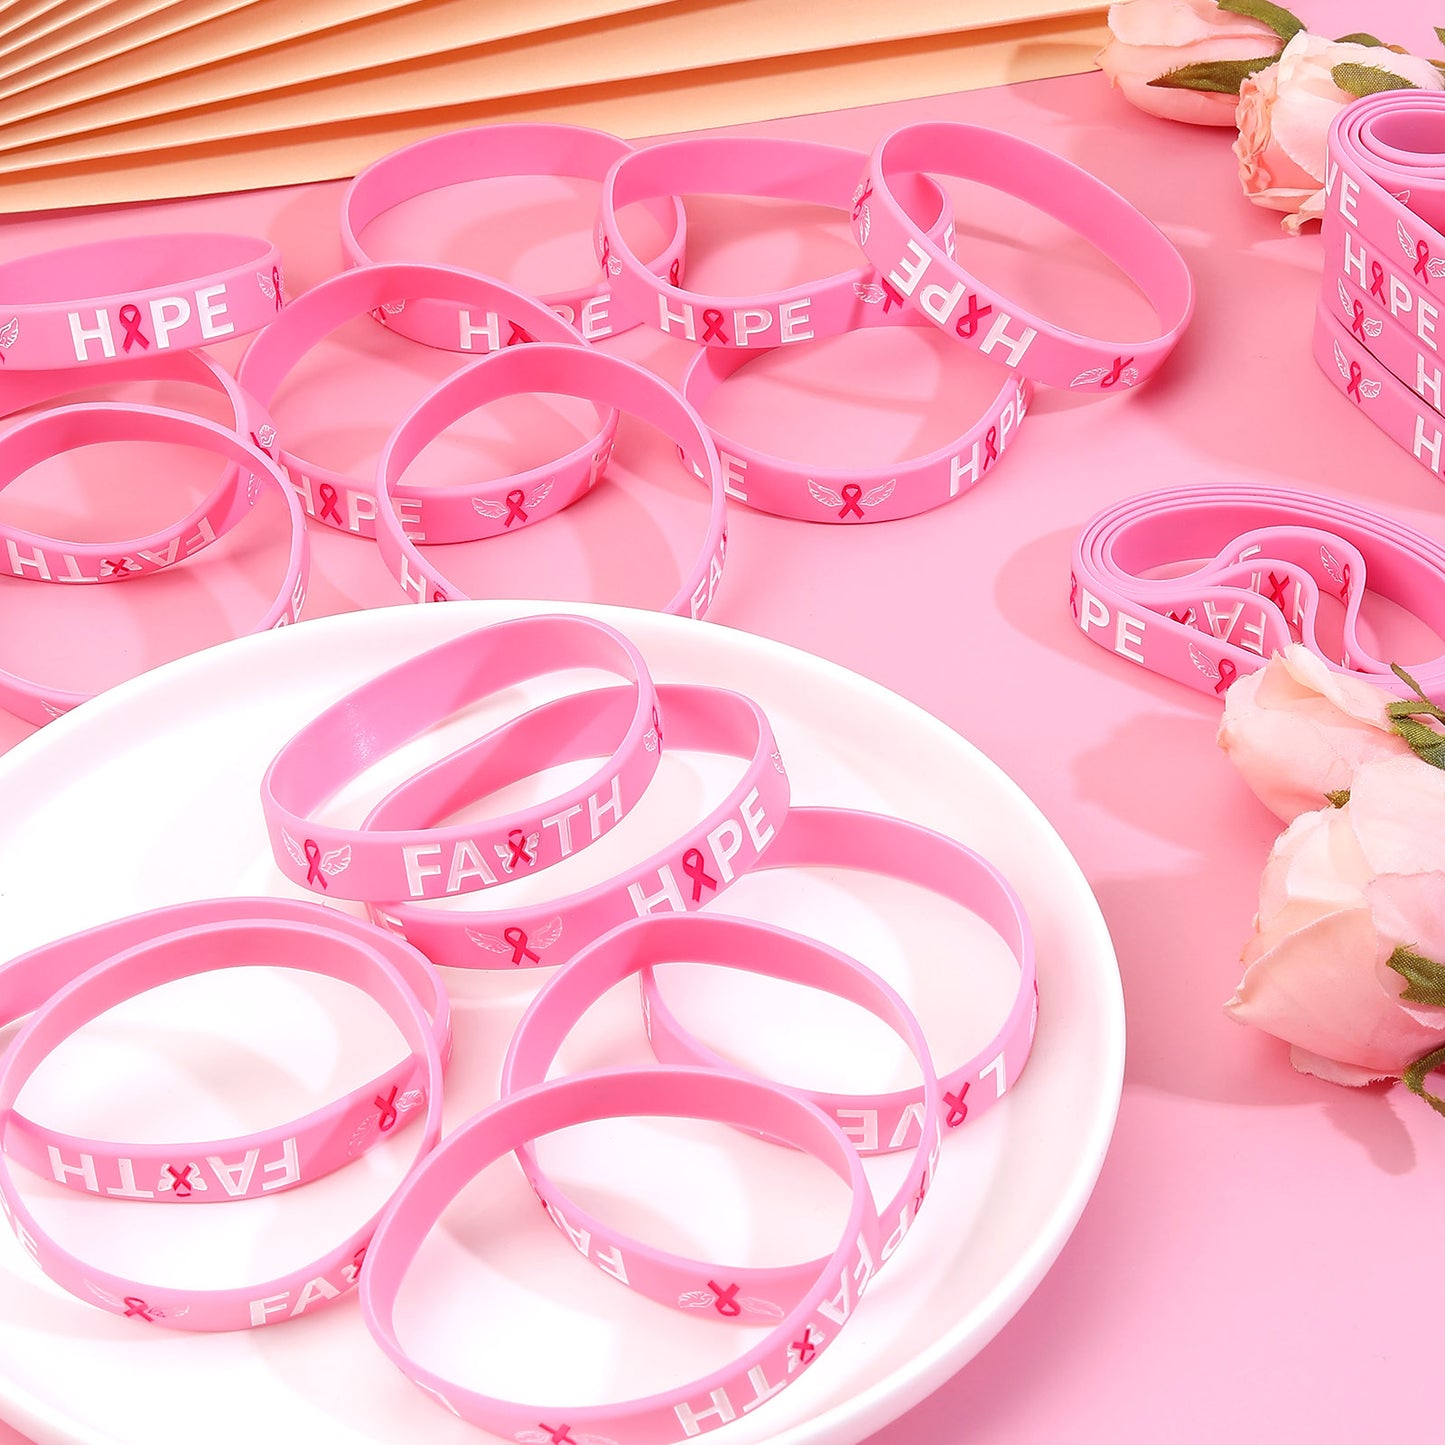 100PCS Breast Cancer Awareness Silicone Bracelets